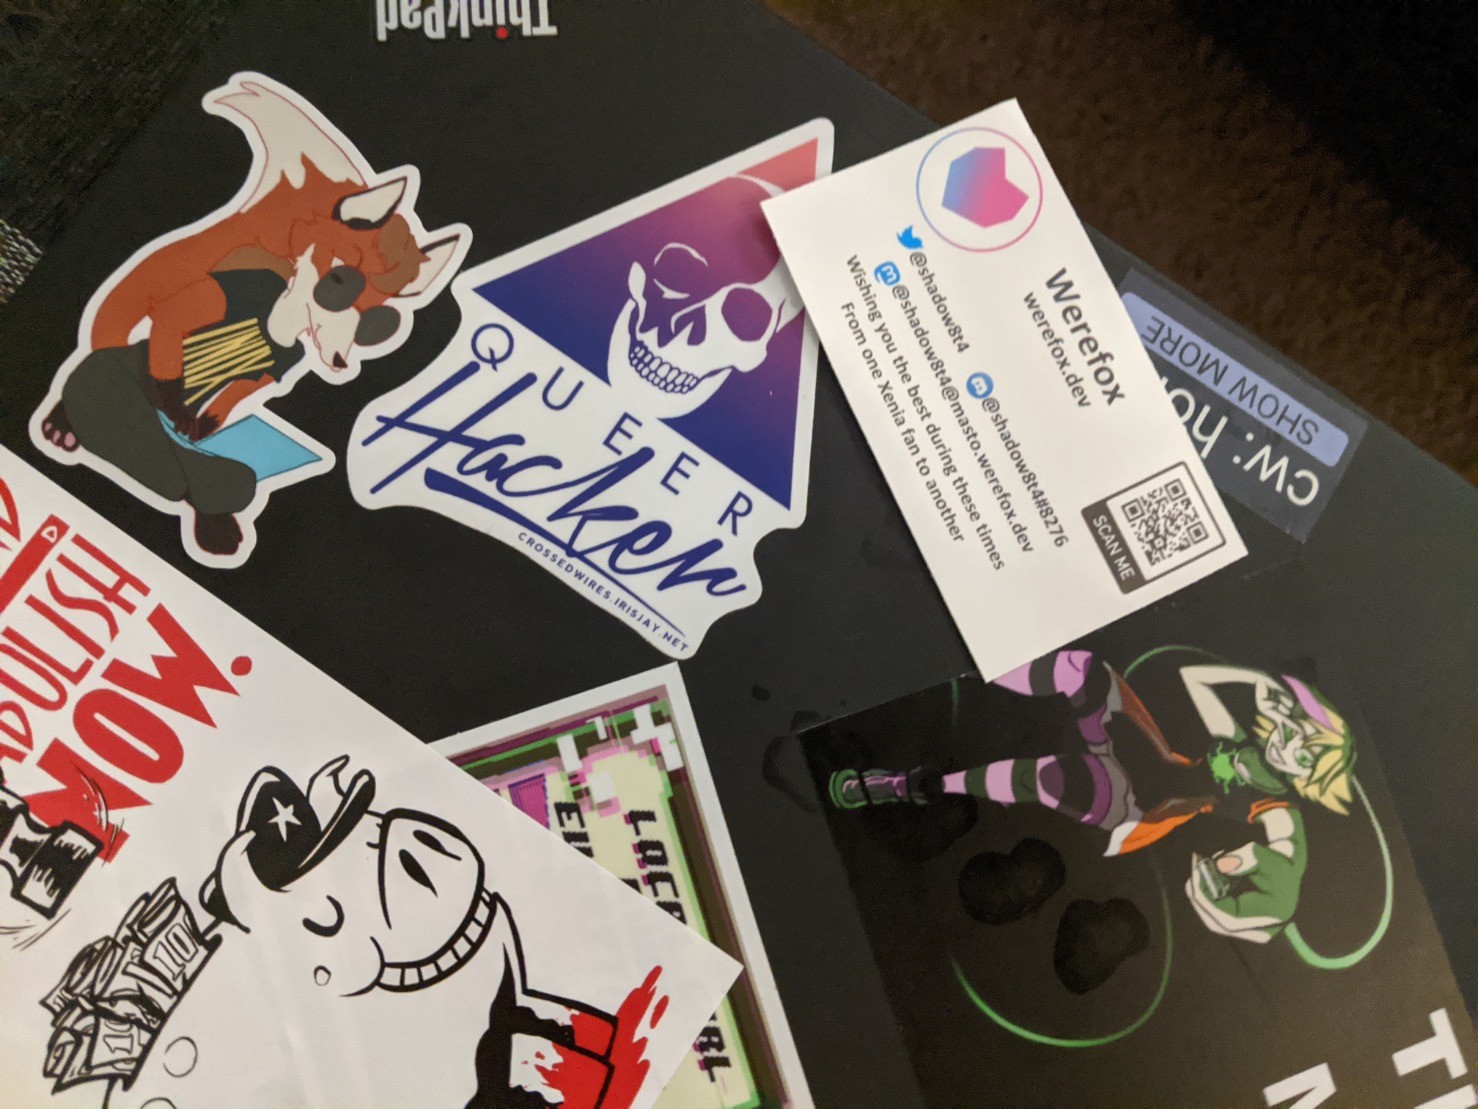 My thinkpad, decorated with stickers, including one of noted linux fox Xenia hunched over a laptop. Next to a Queer Hacker AOL logo sticker and a defund and abolish the police sticker.